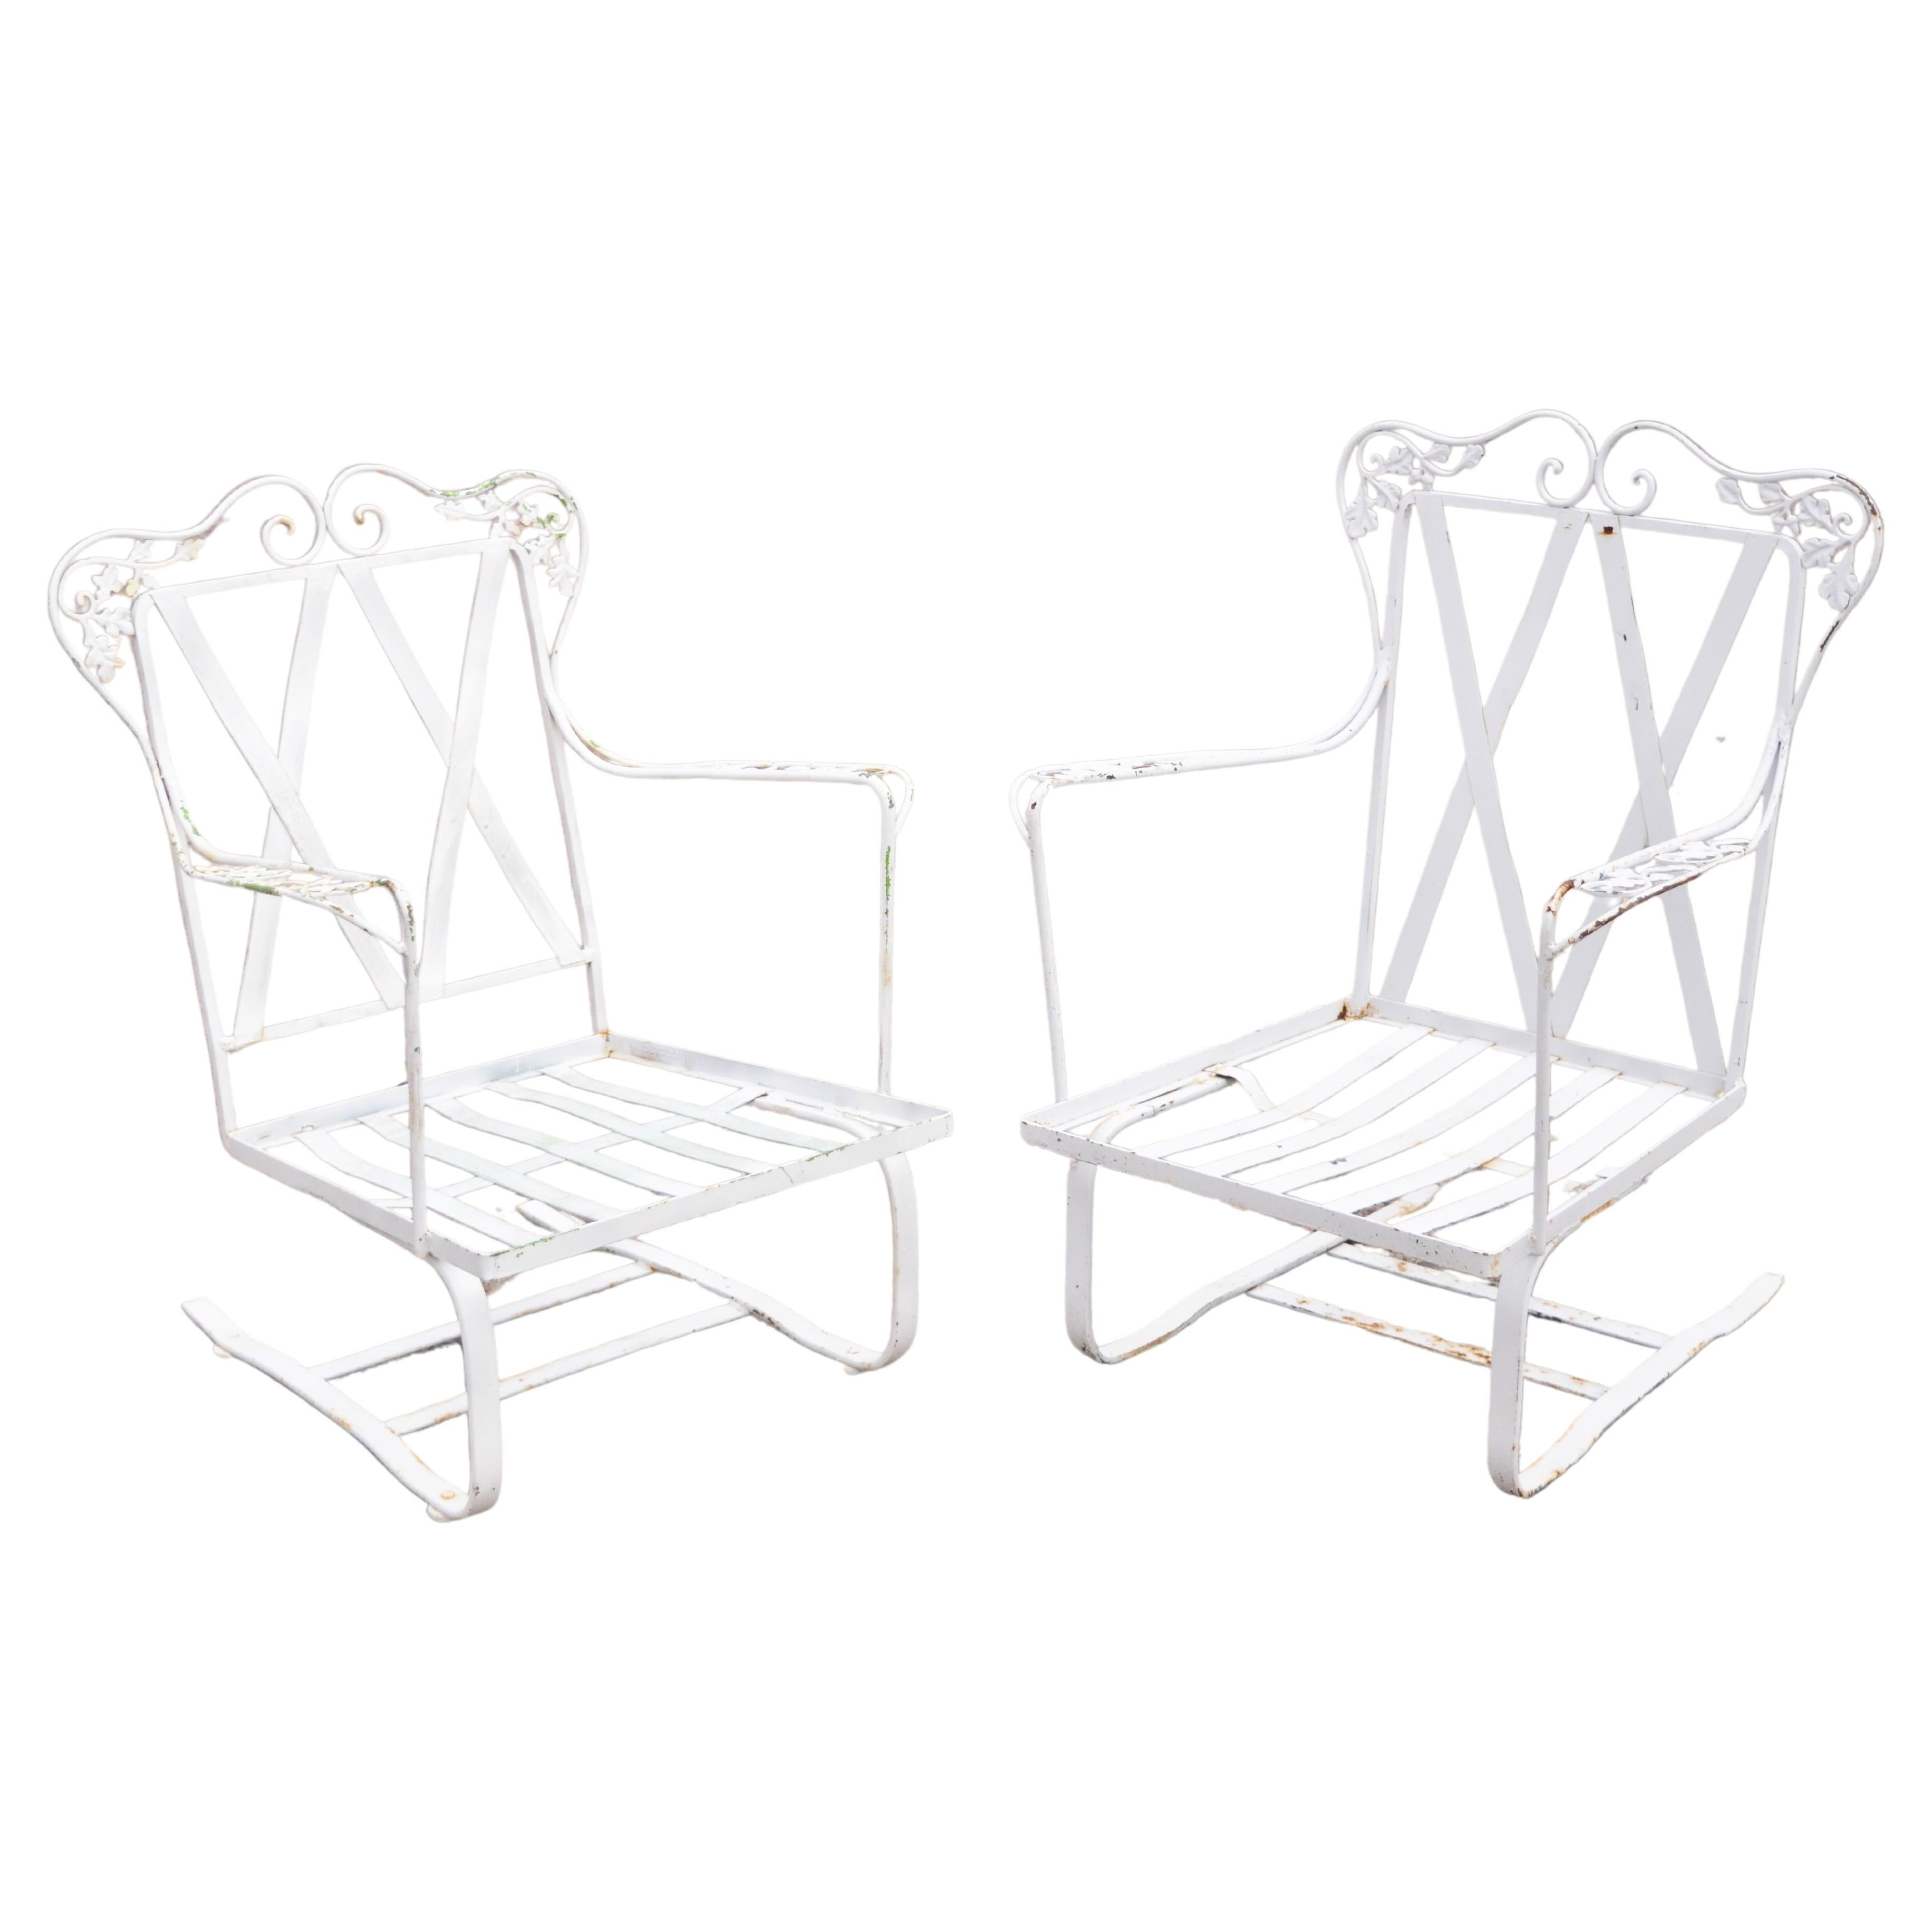 Antique Woodard Chantilly Rose Wrought Iron Patio Bouncer Lounge Chair - a Pair For Sale